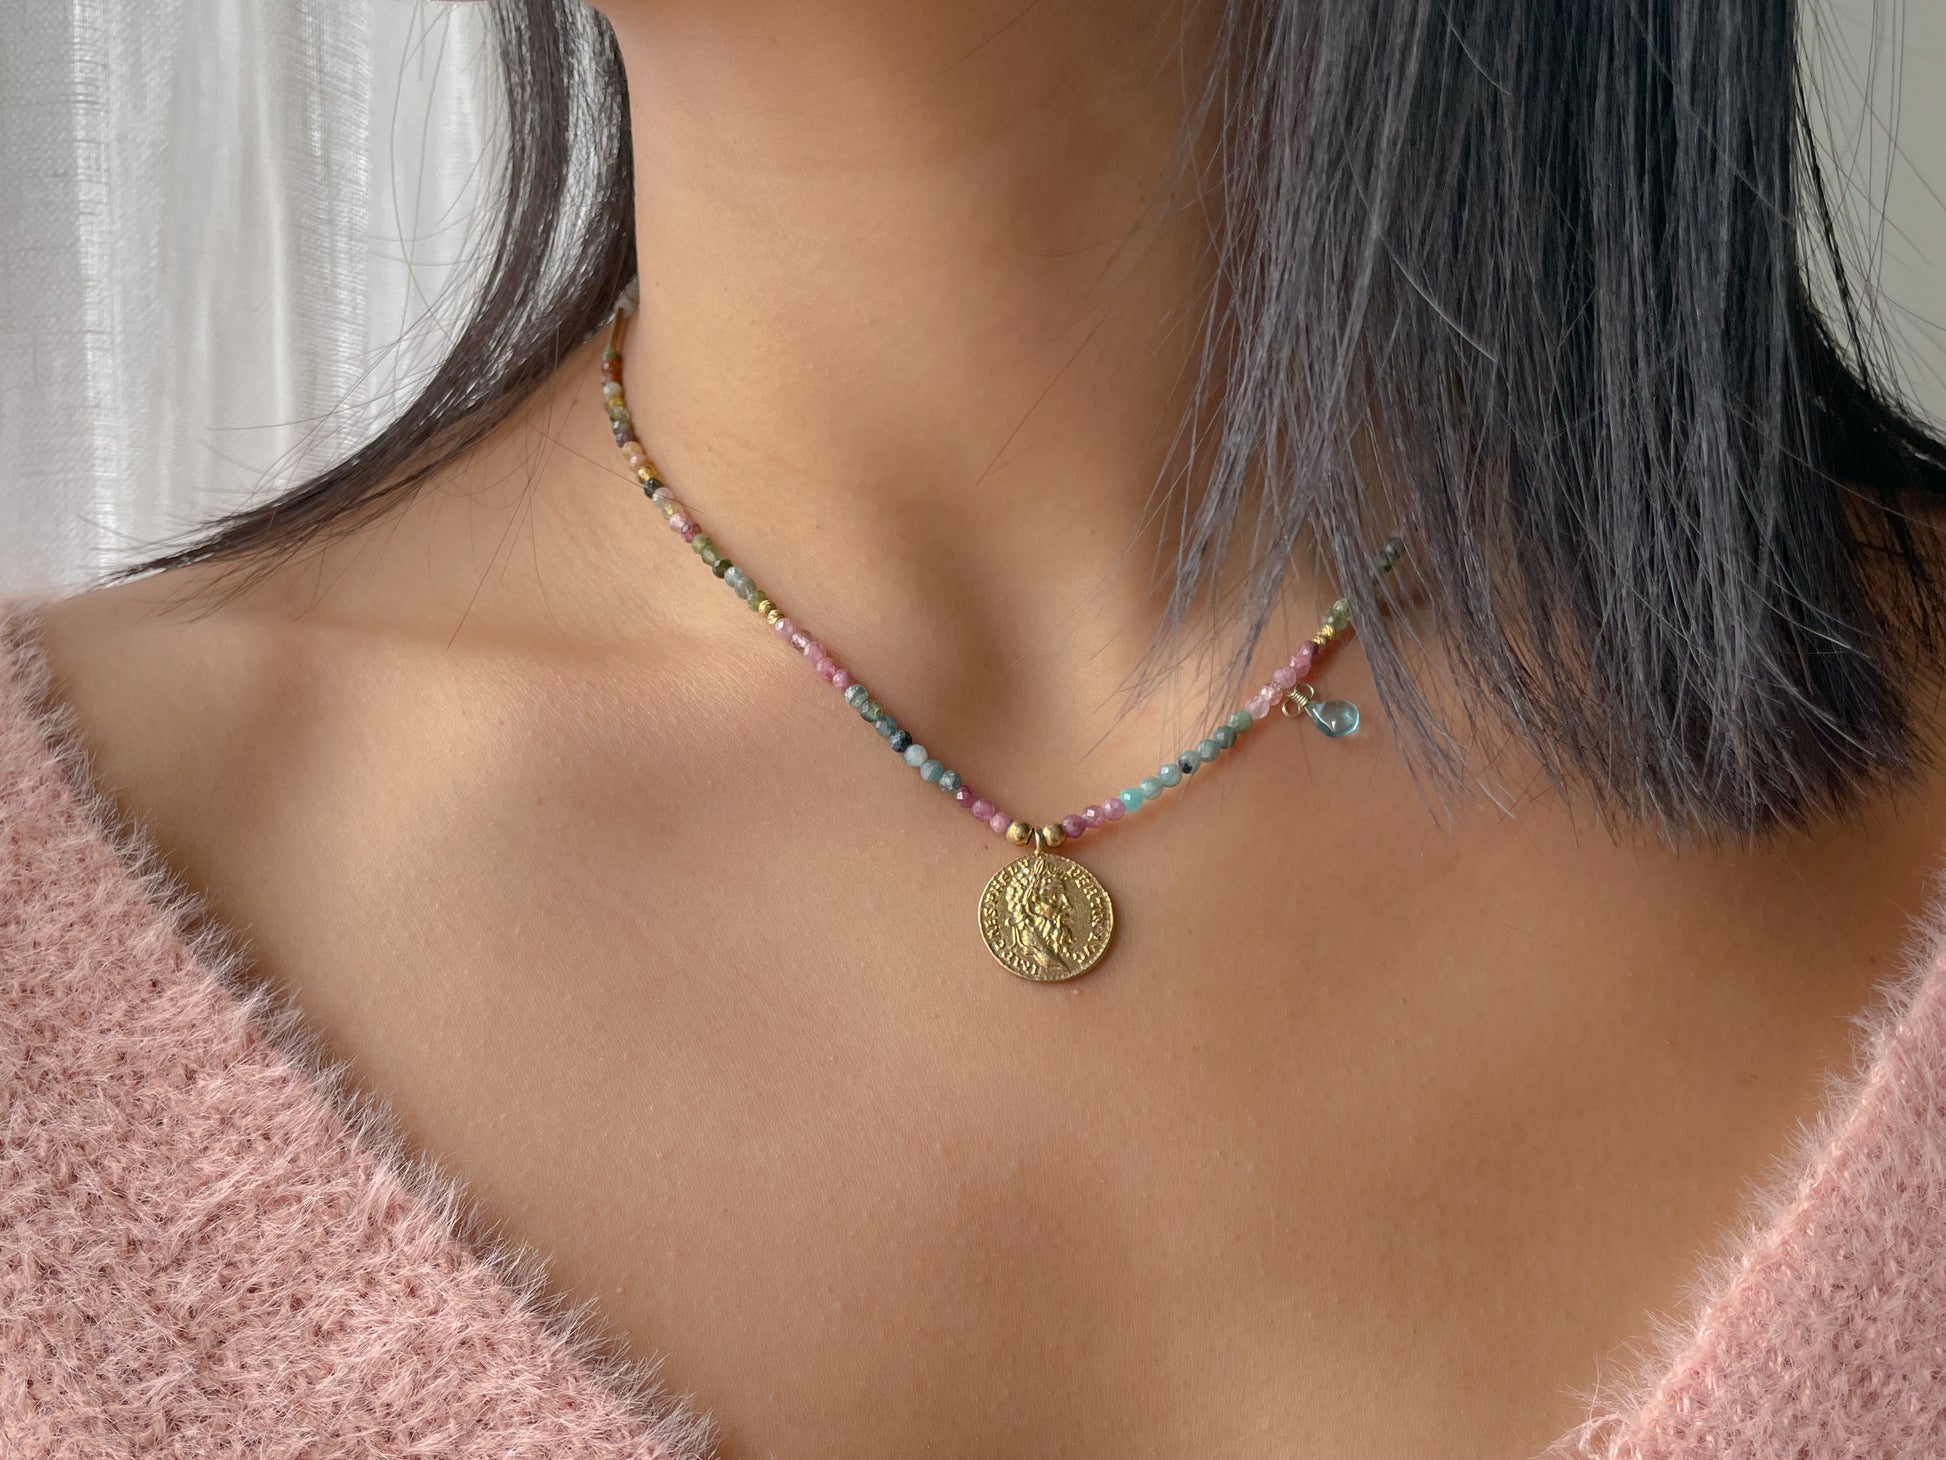 A closer look to the colourful tourmaline stones and the brilliant acquamarine.